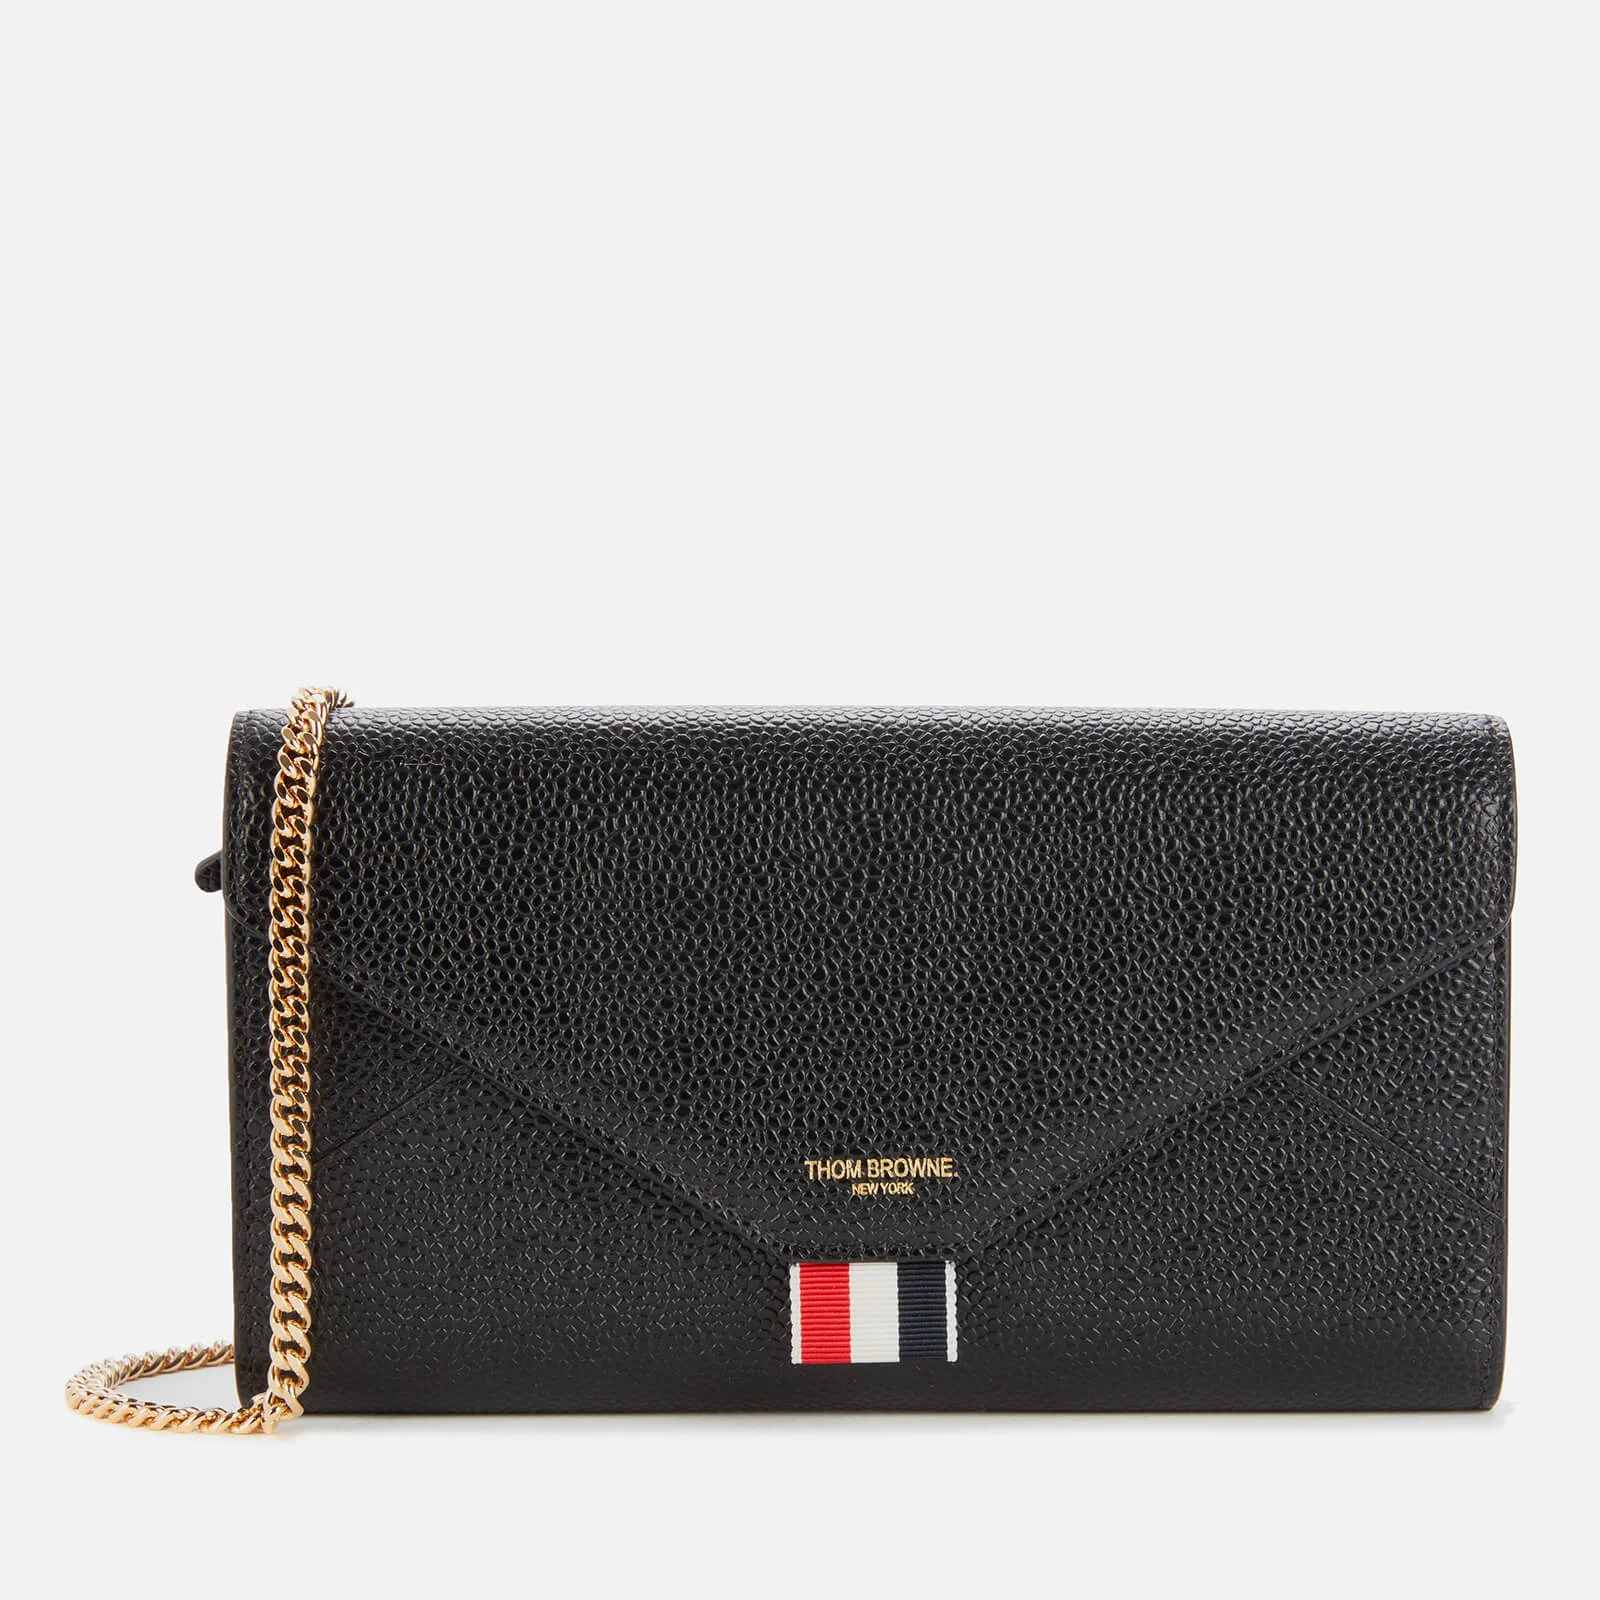 Thom Browne Women's Envelope Long Wallet with Long Chain - Black Image 1